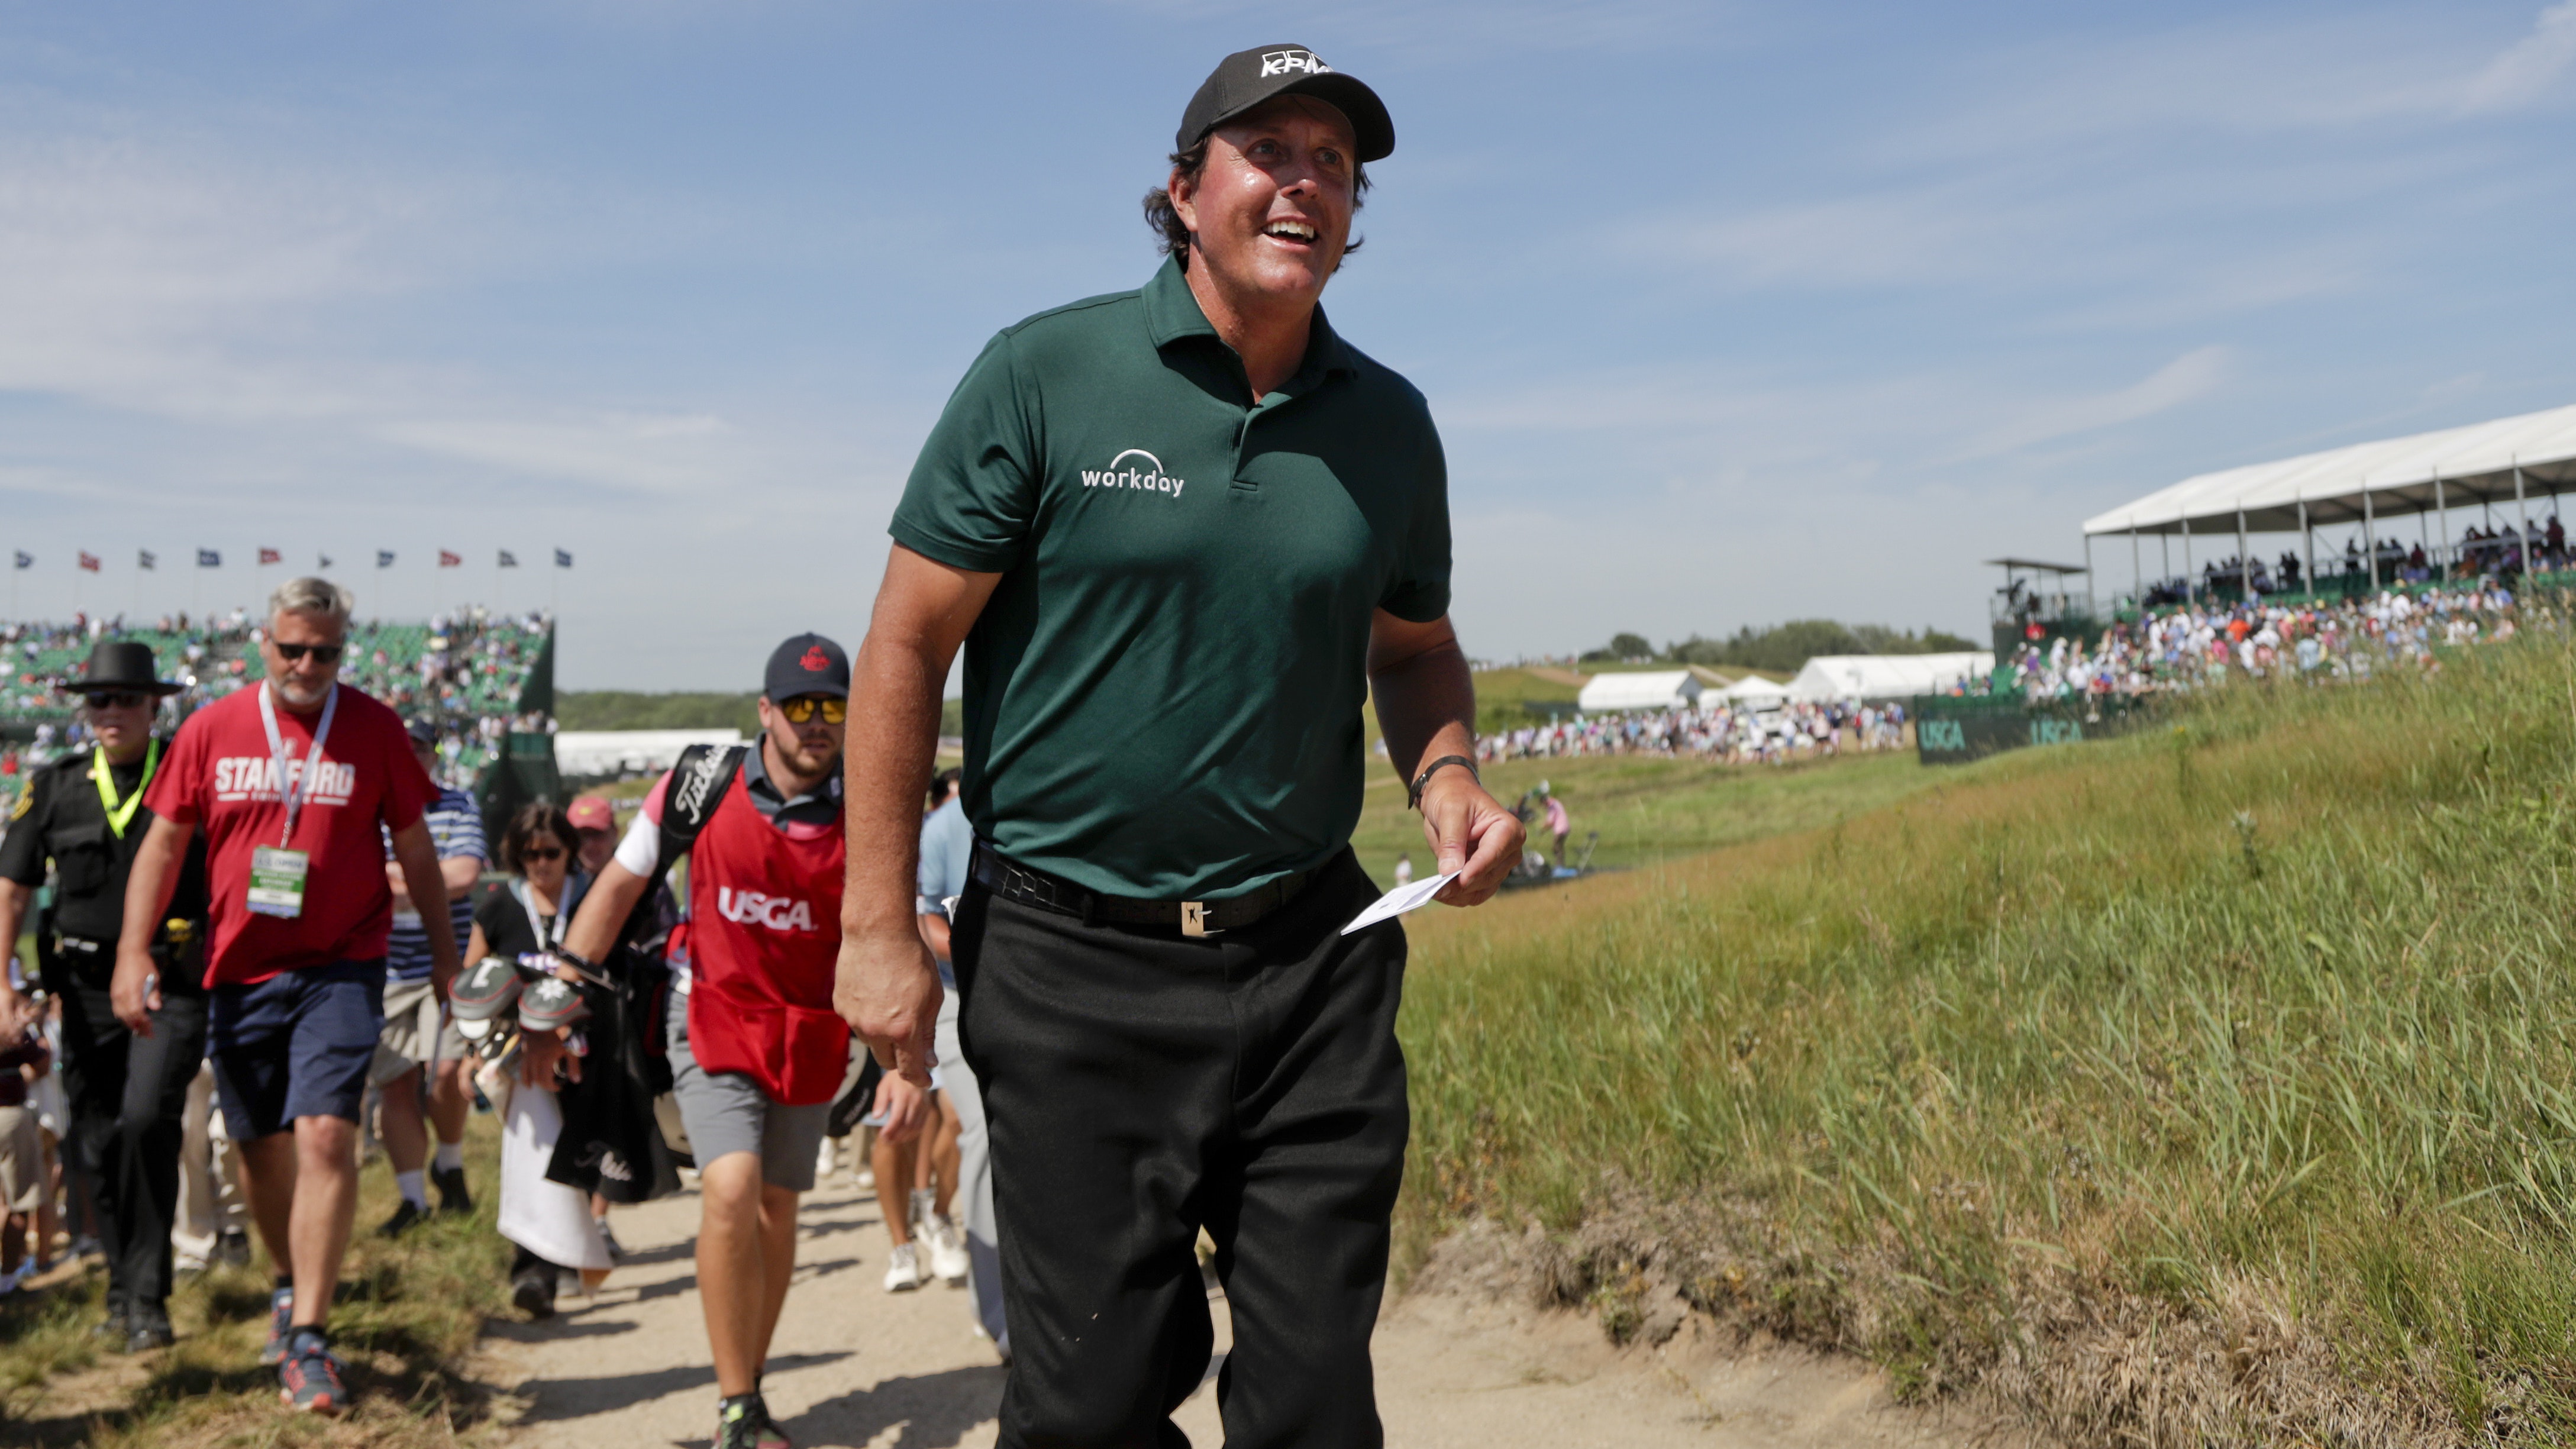 Phil Mickelson is going to win US Open at Pebble, says Jim Nantz